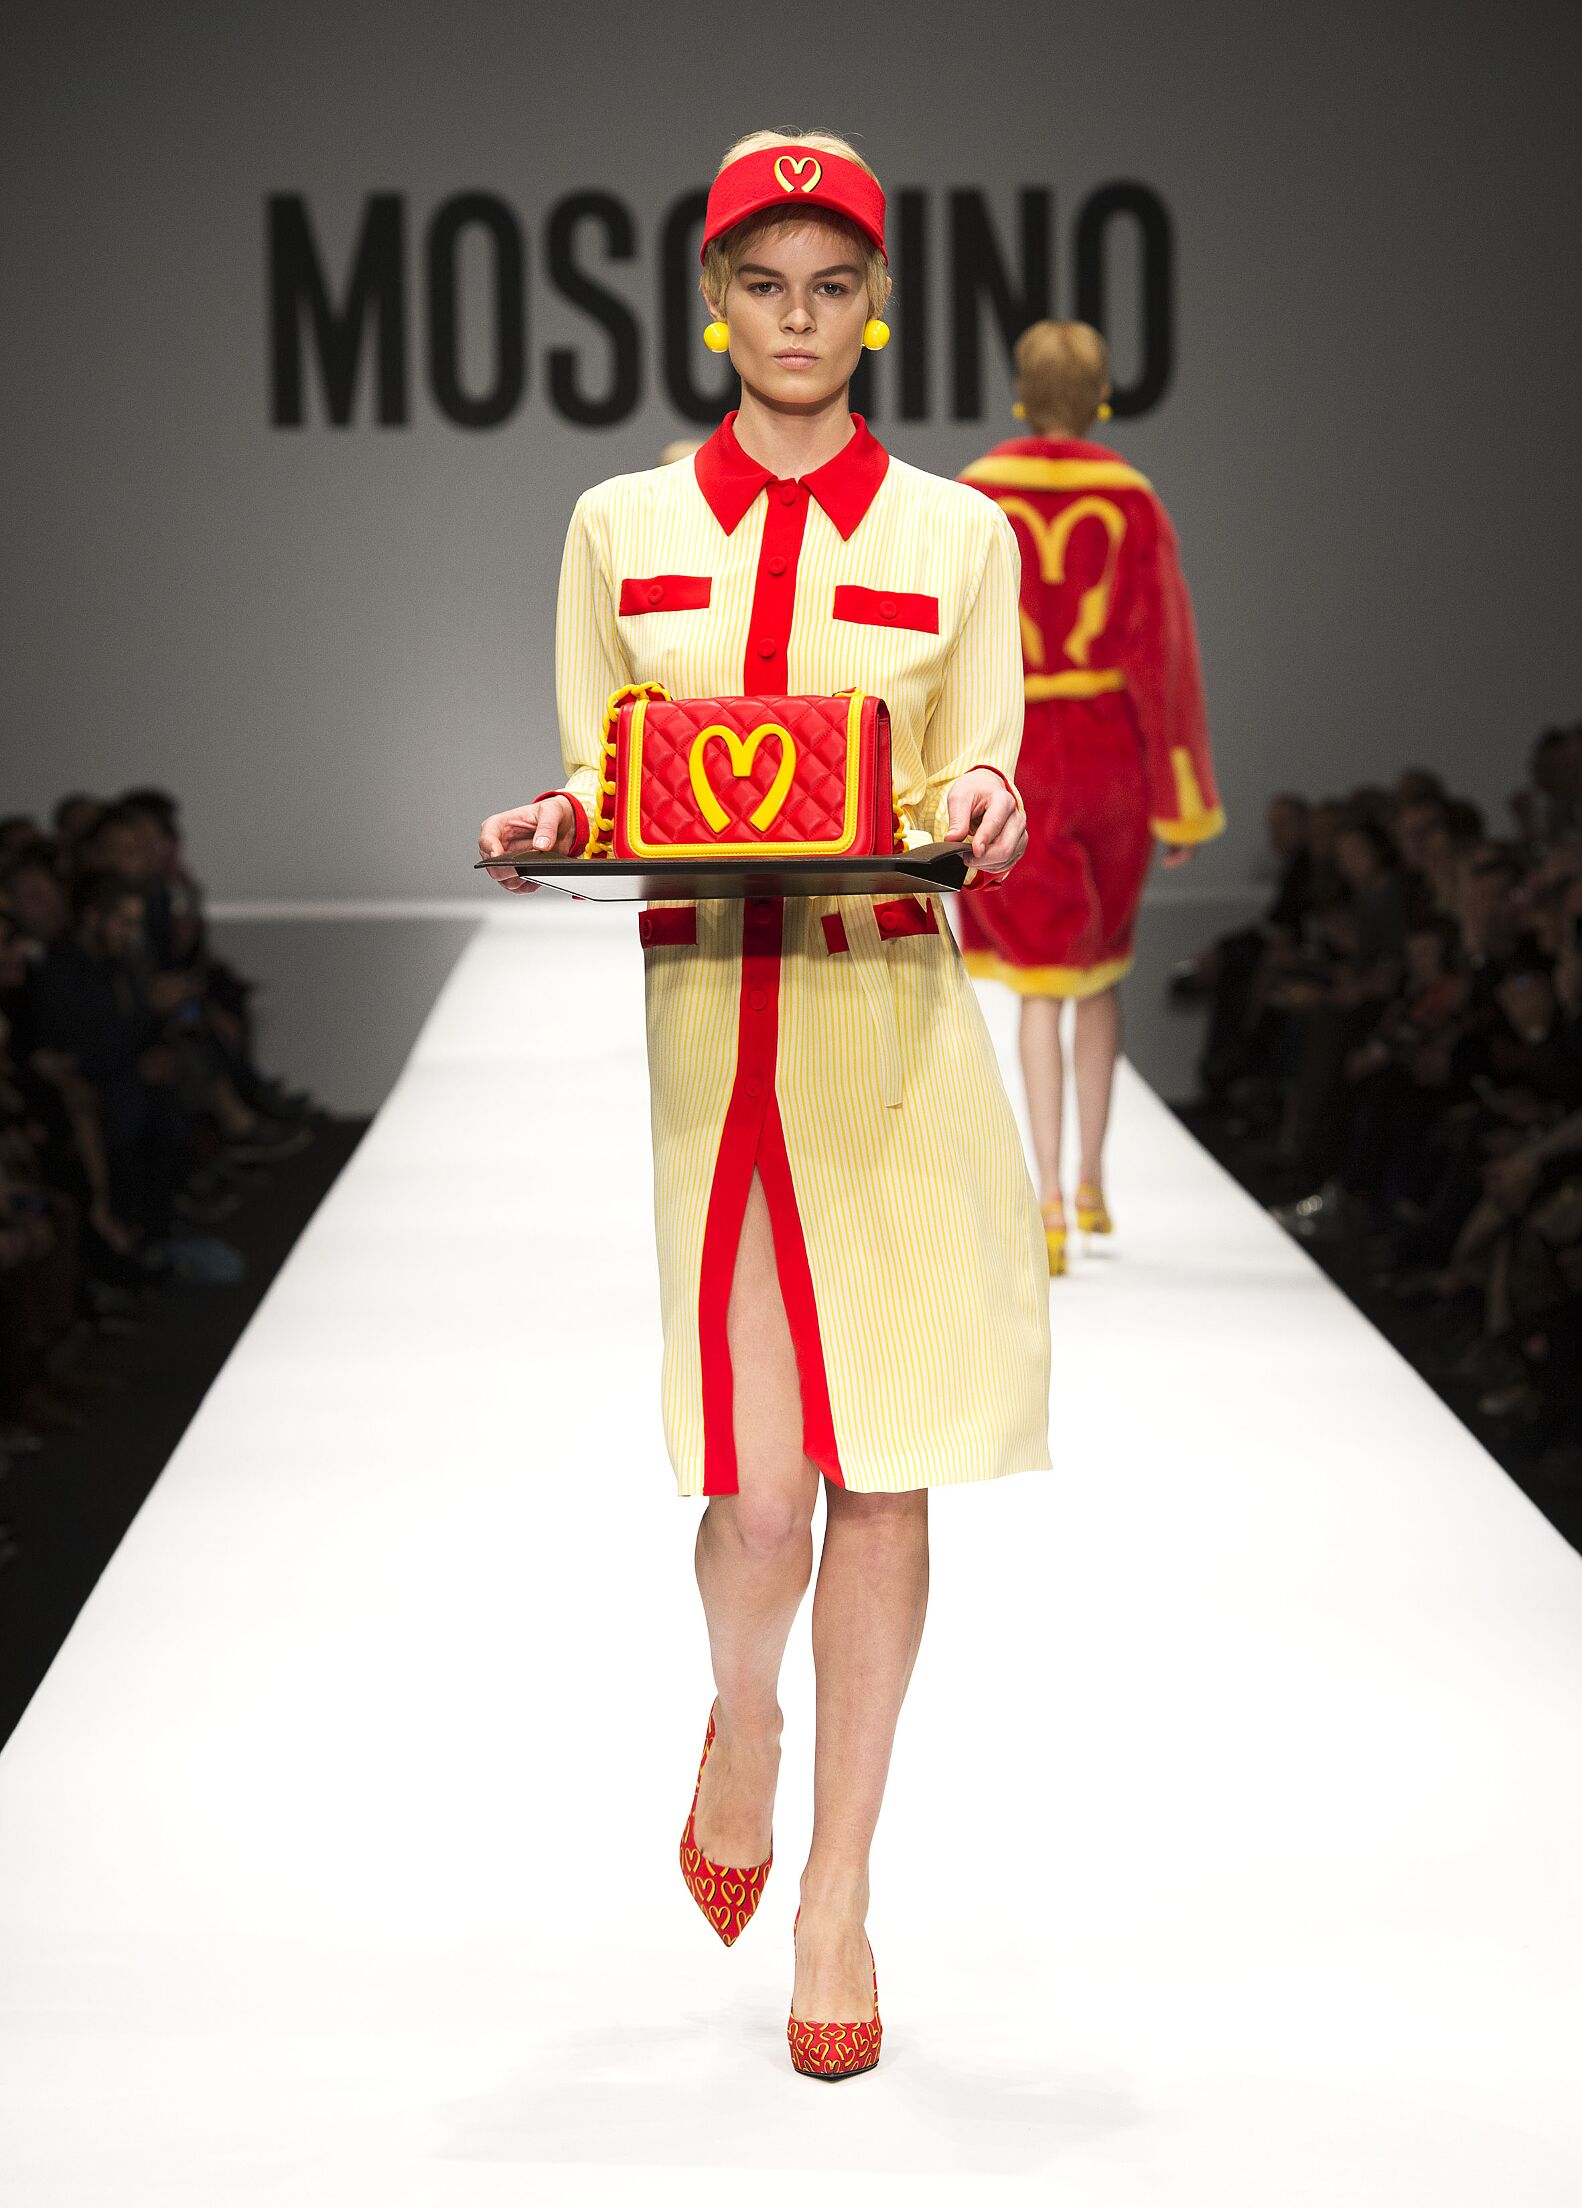 moschino new collection